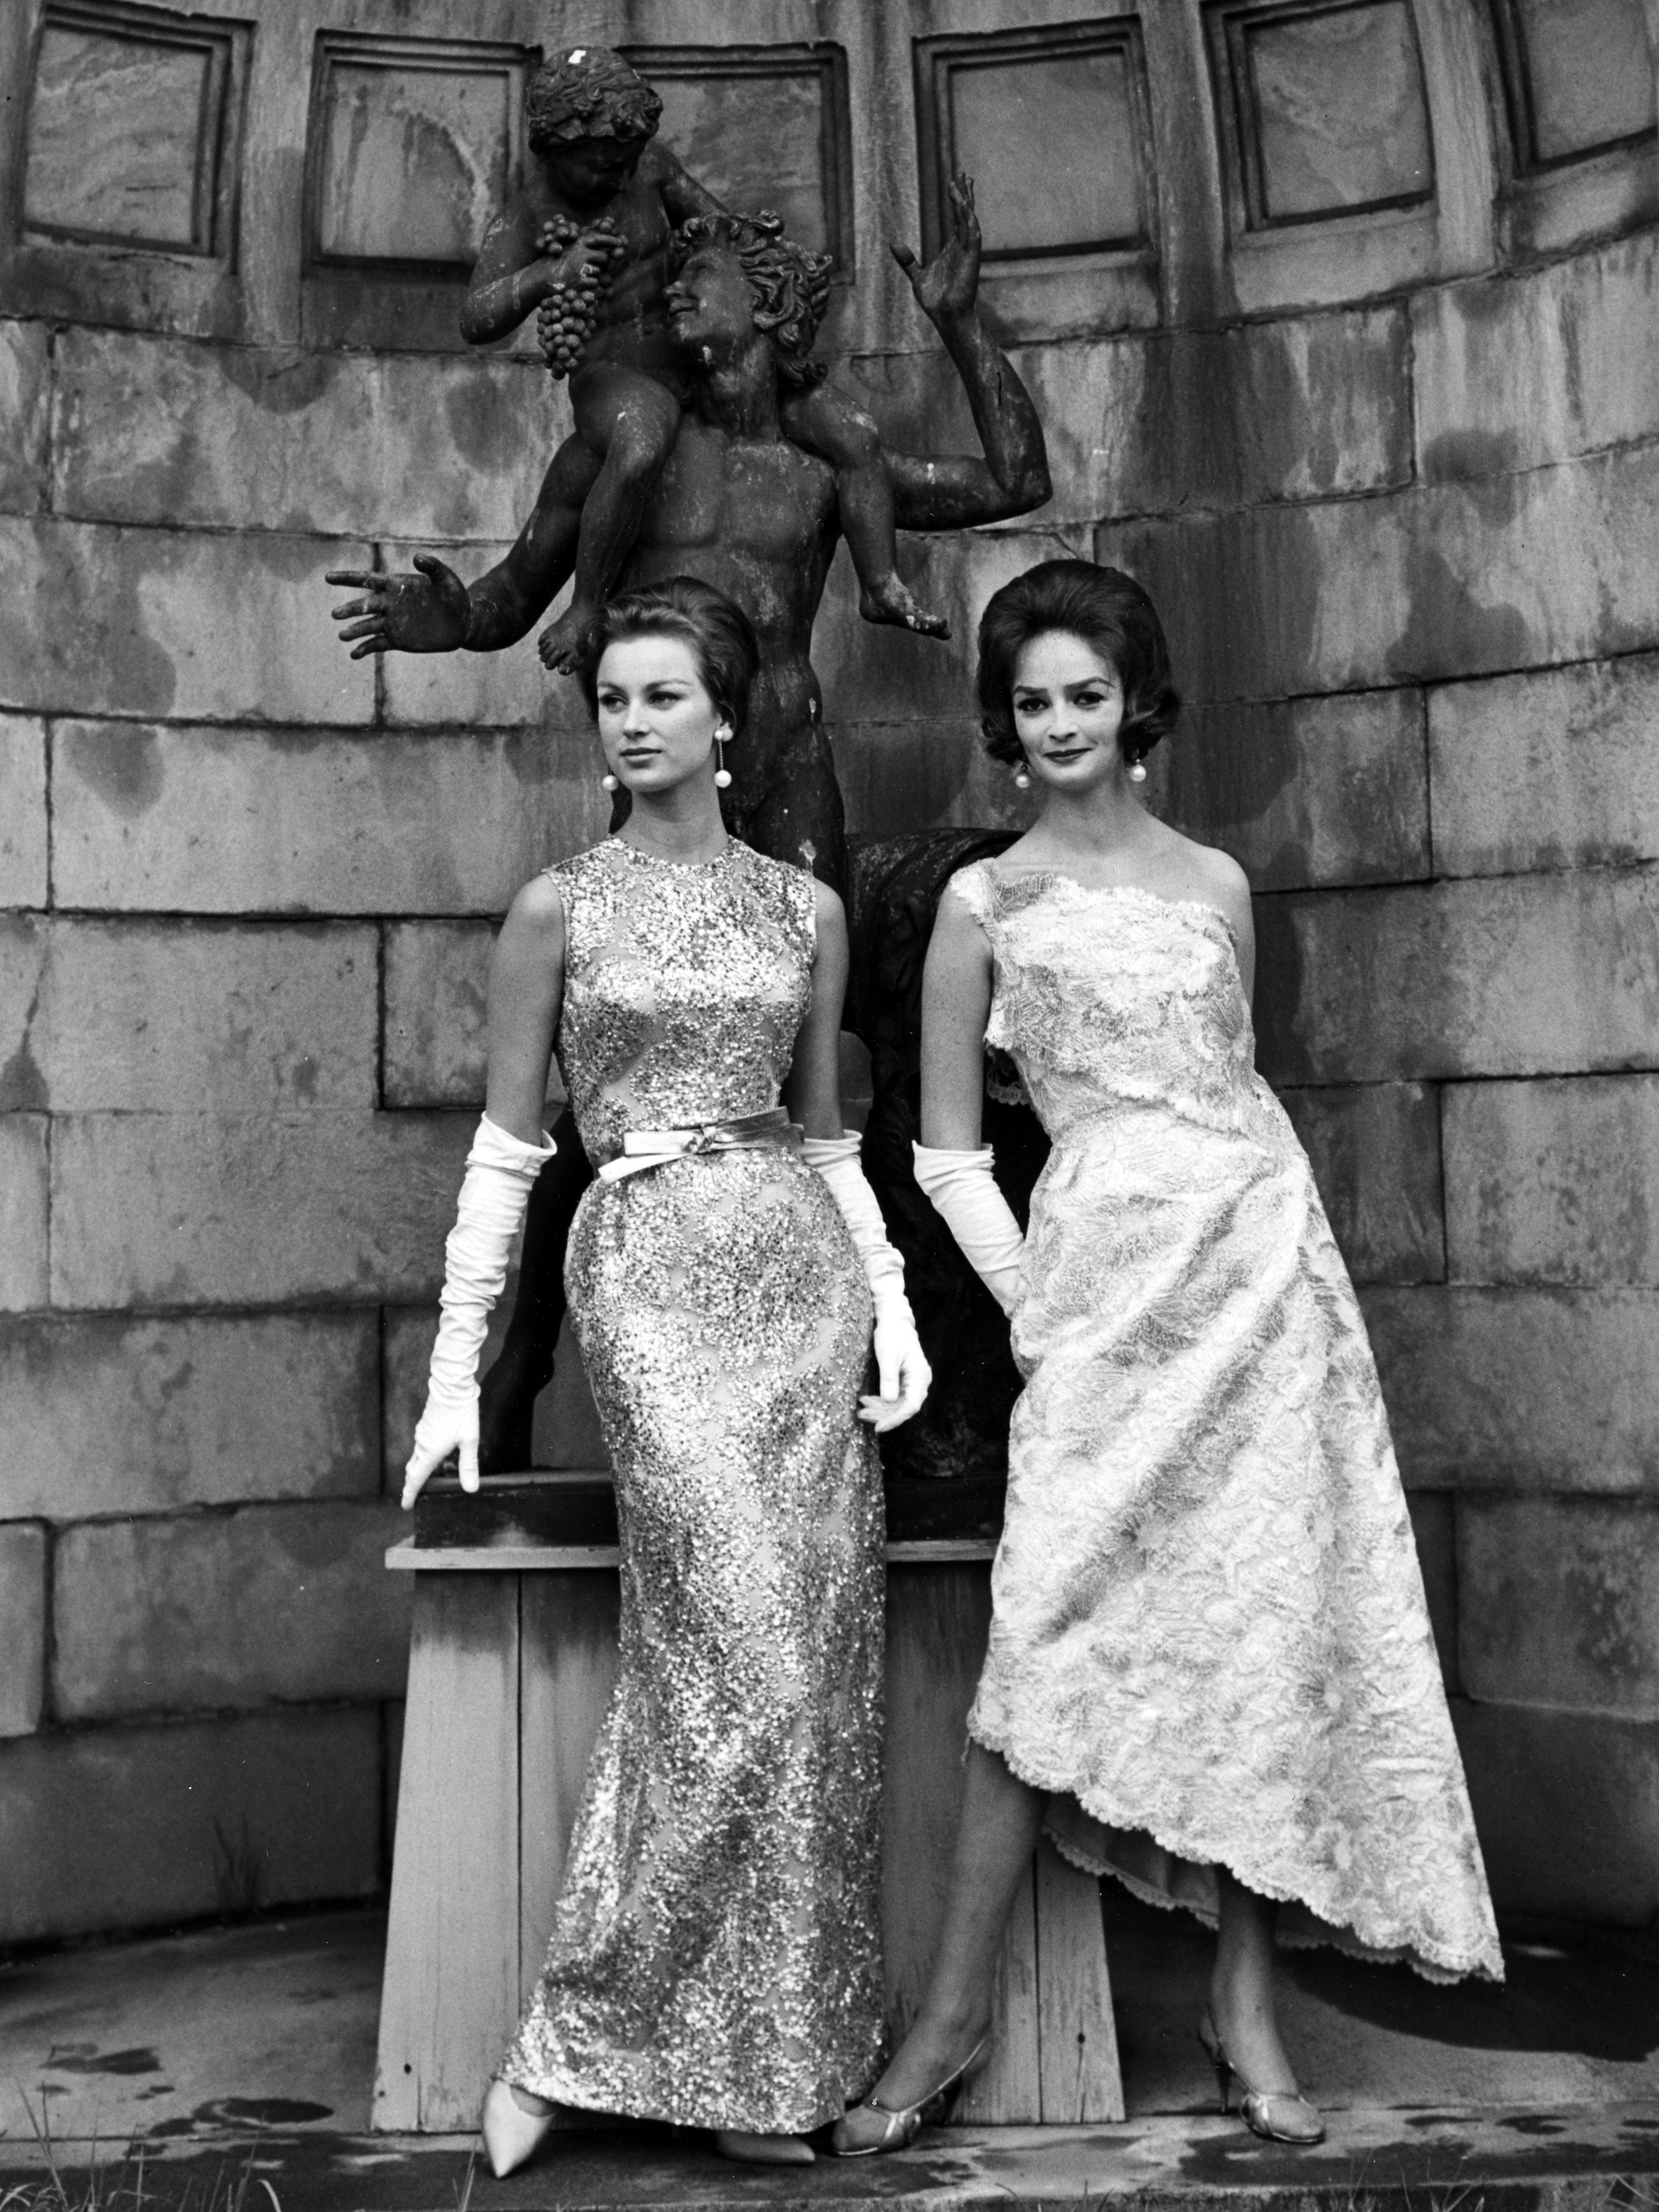 Black and white fashion photograph of two women in glittery evening gowns.